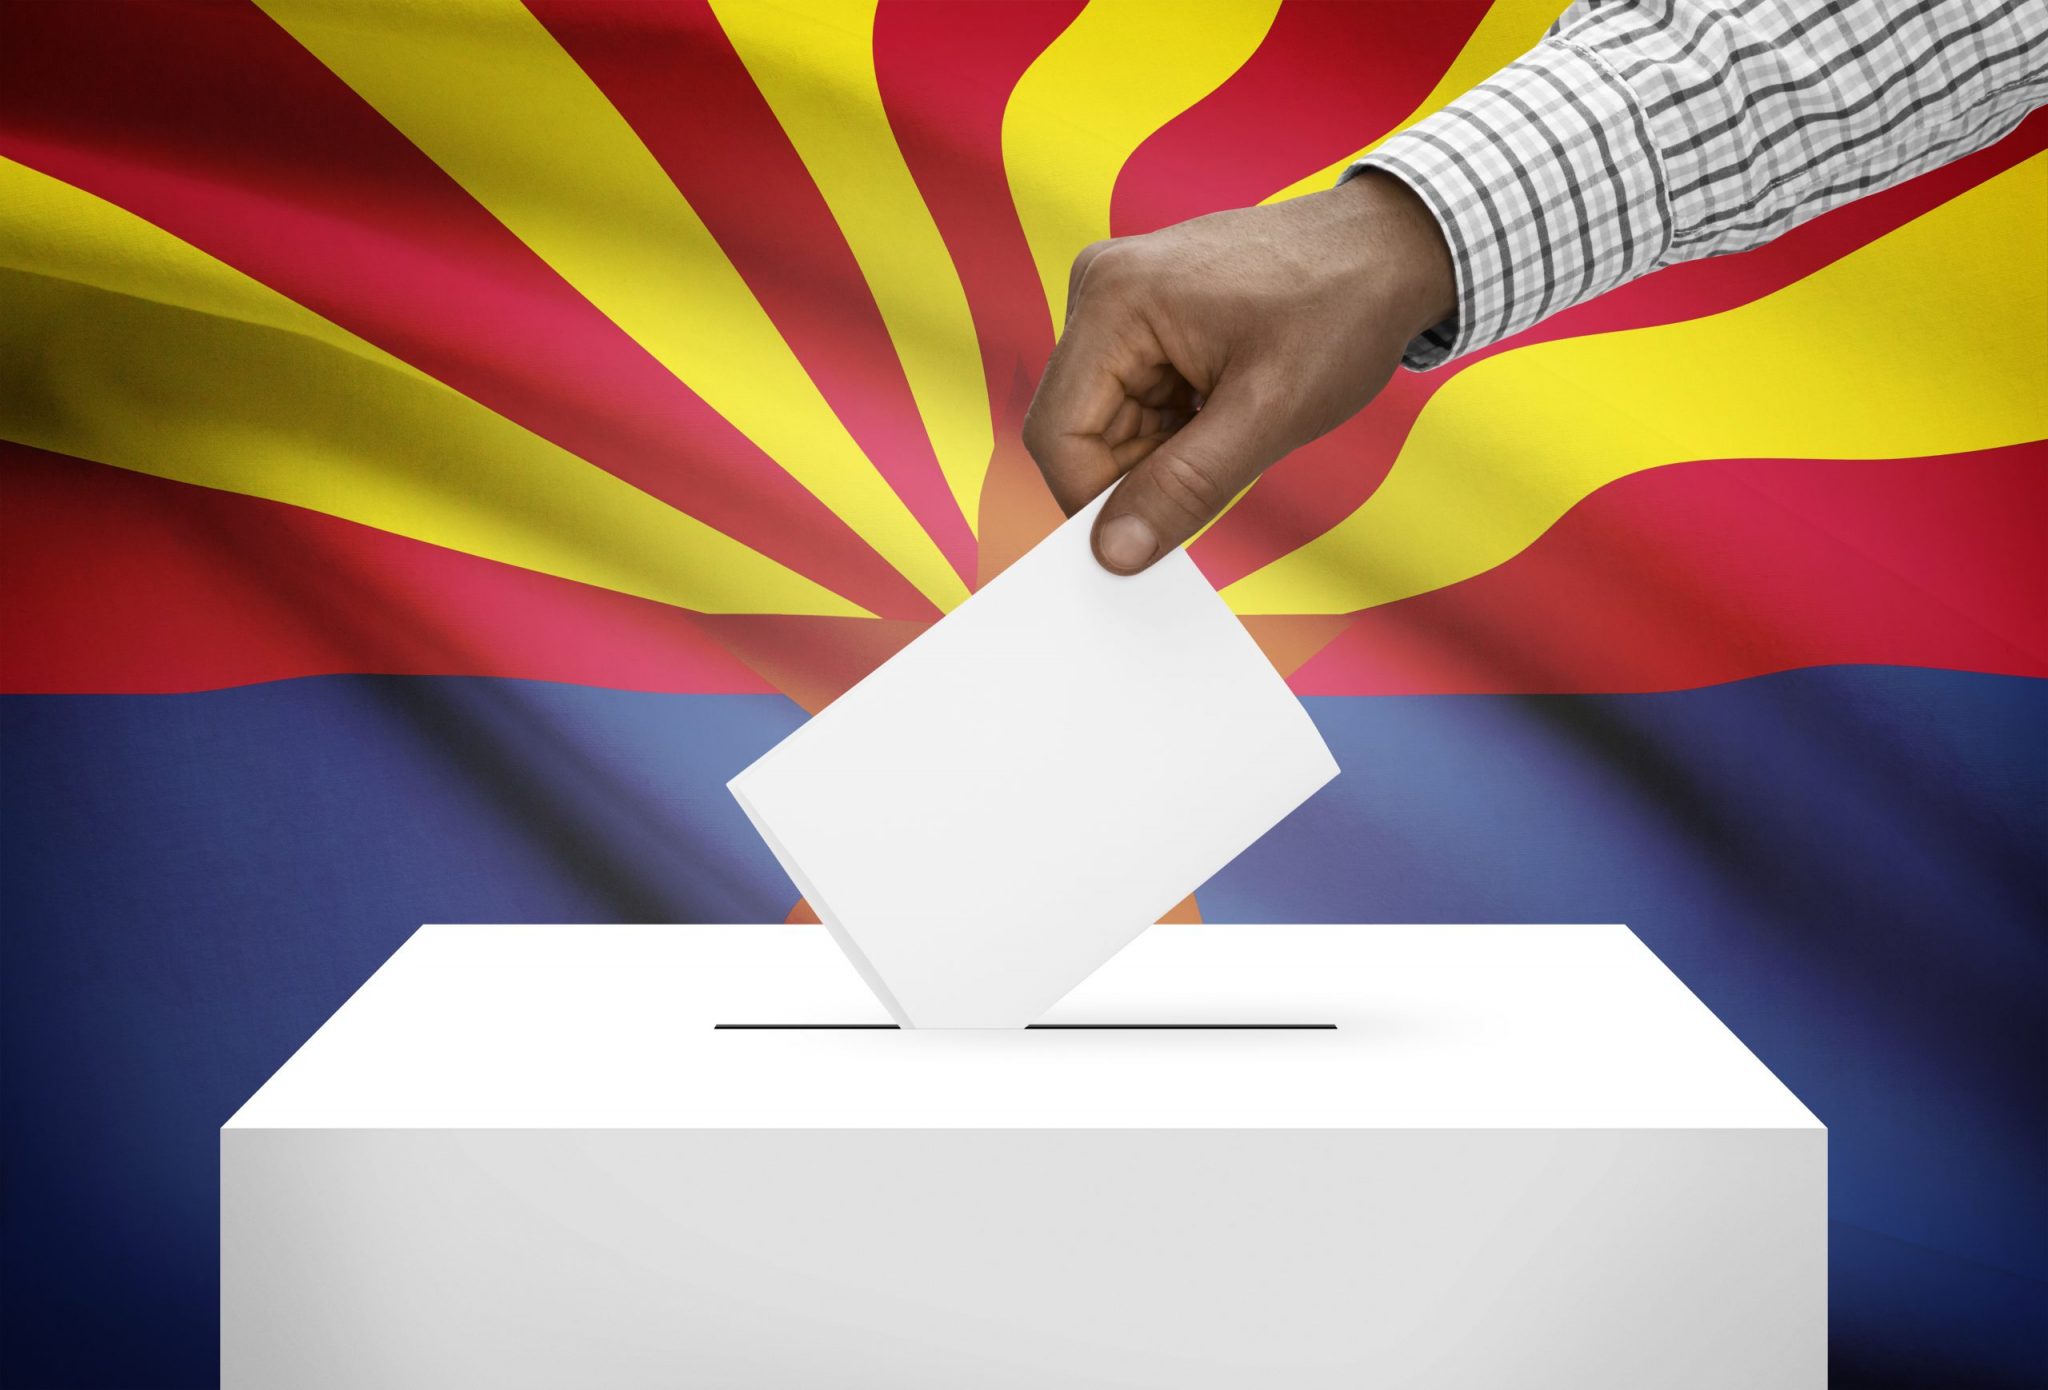 Voting concept - Ballot box with US state flag on background - Arizona